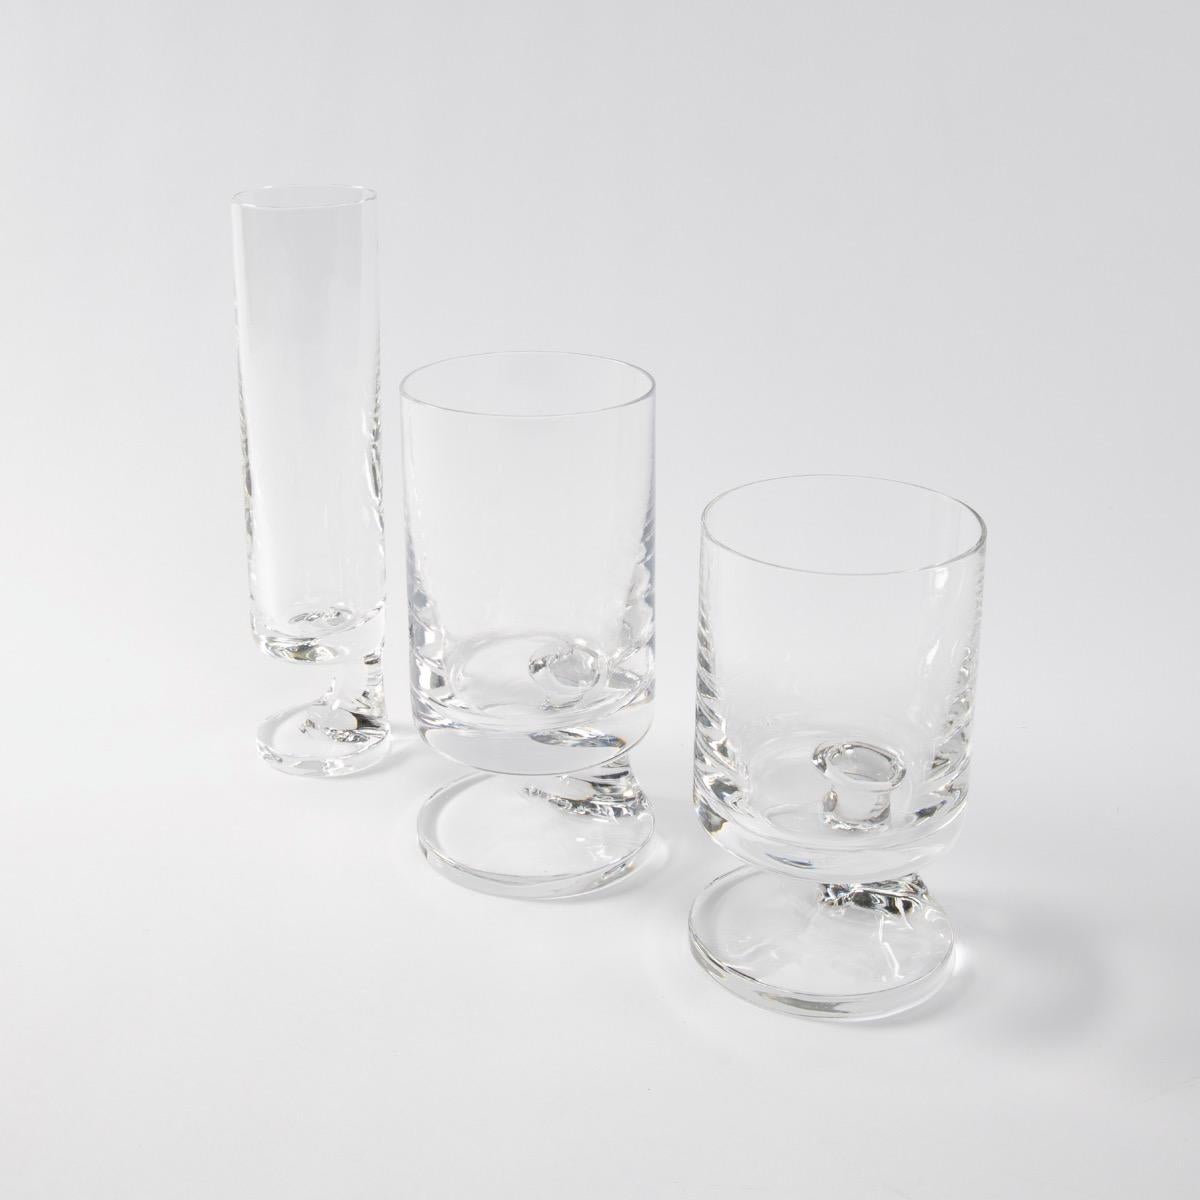 A truly historic collection, the first ever produced by Arnolfo di Cambio, signed by the great designer.
Drinking glasses with an asymmetric form, from the Smoke series can be held with just one finger, so that one can hold a cigarette while